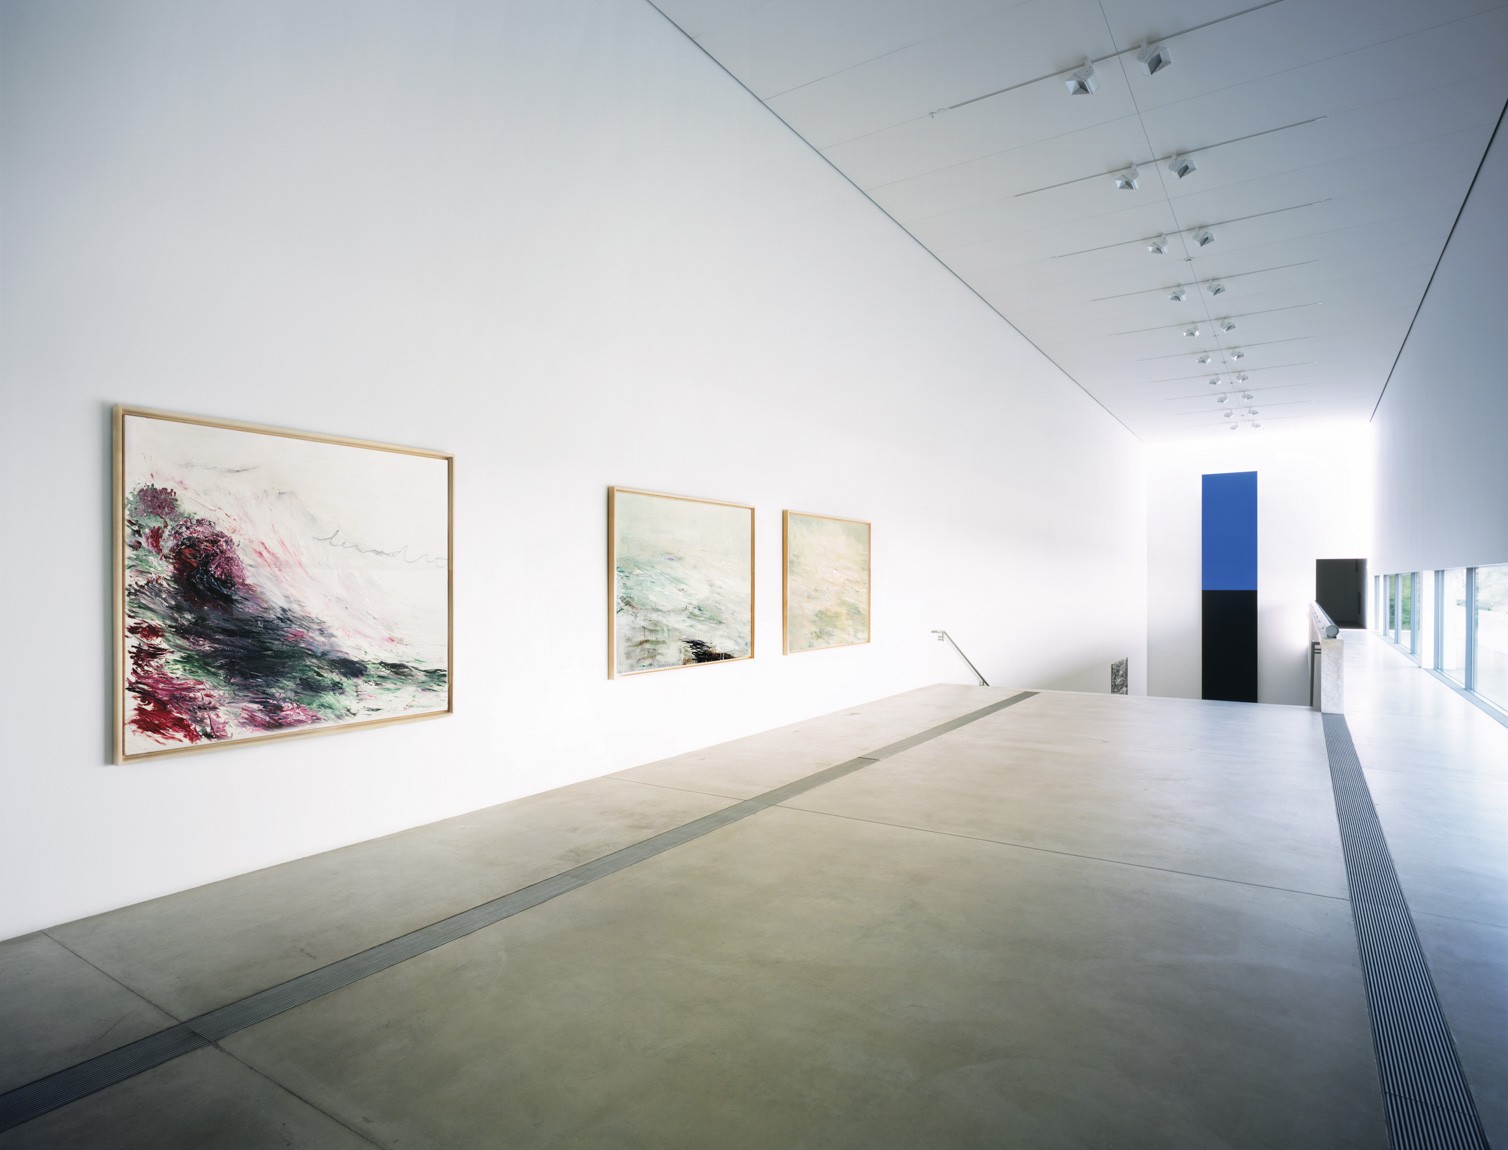 A view of the Main Gallery with three large Cy Twombly pieces titled "Hero and Leandro" on the east wall.